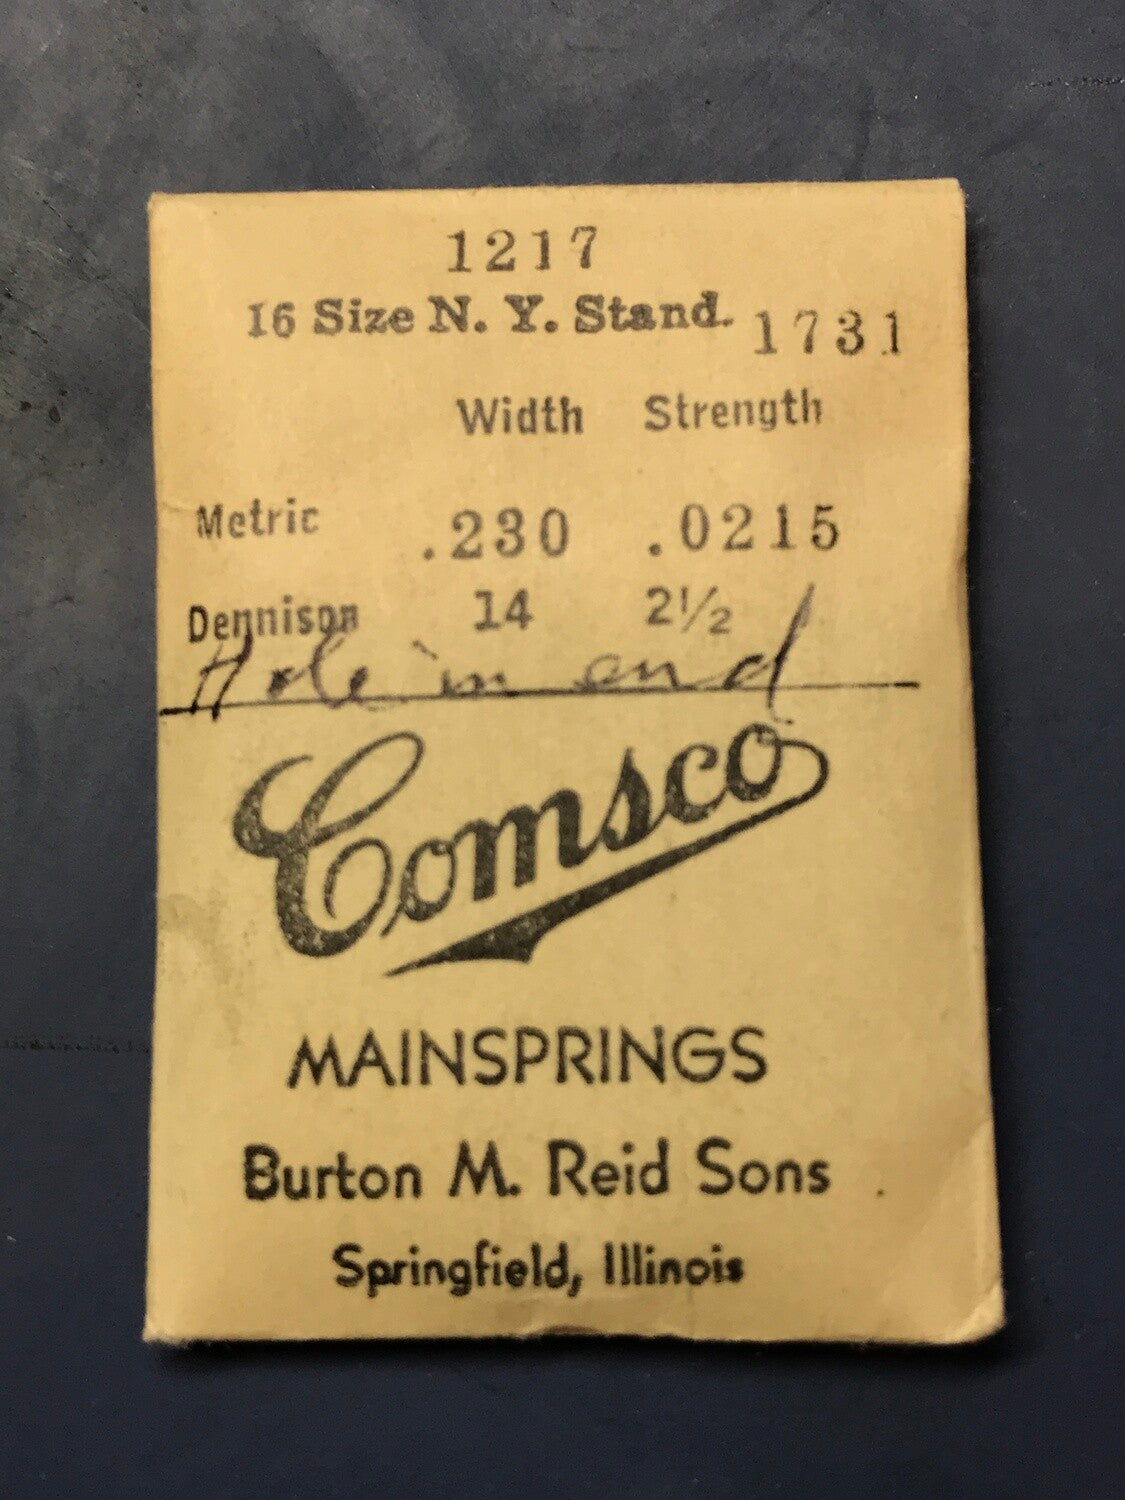 Comsco Mainspring #1217 for 16s N.Y. Standard Factory No. 1731 - Steel